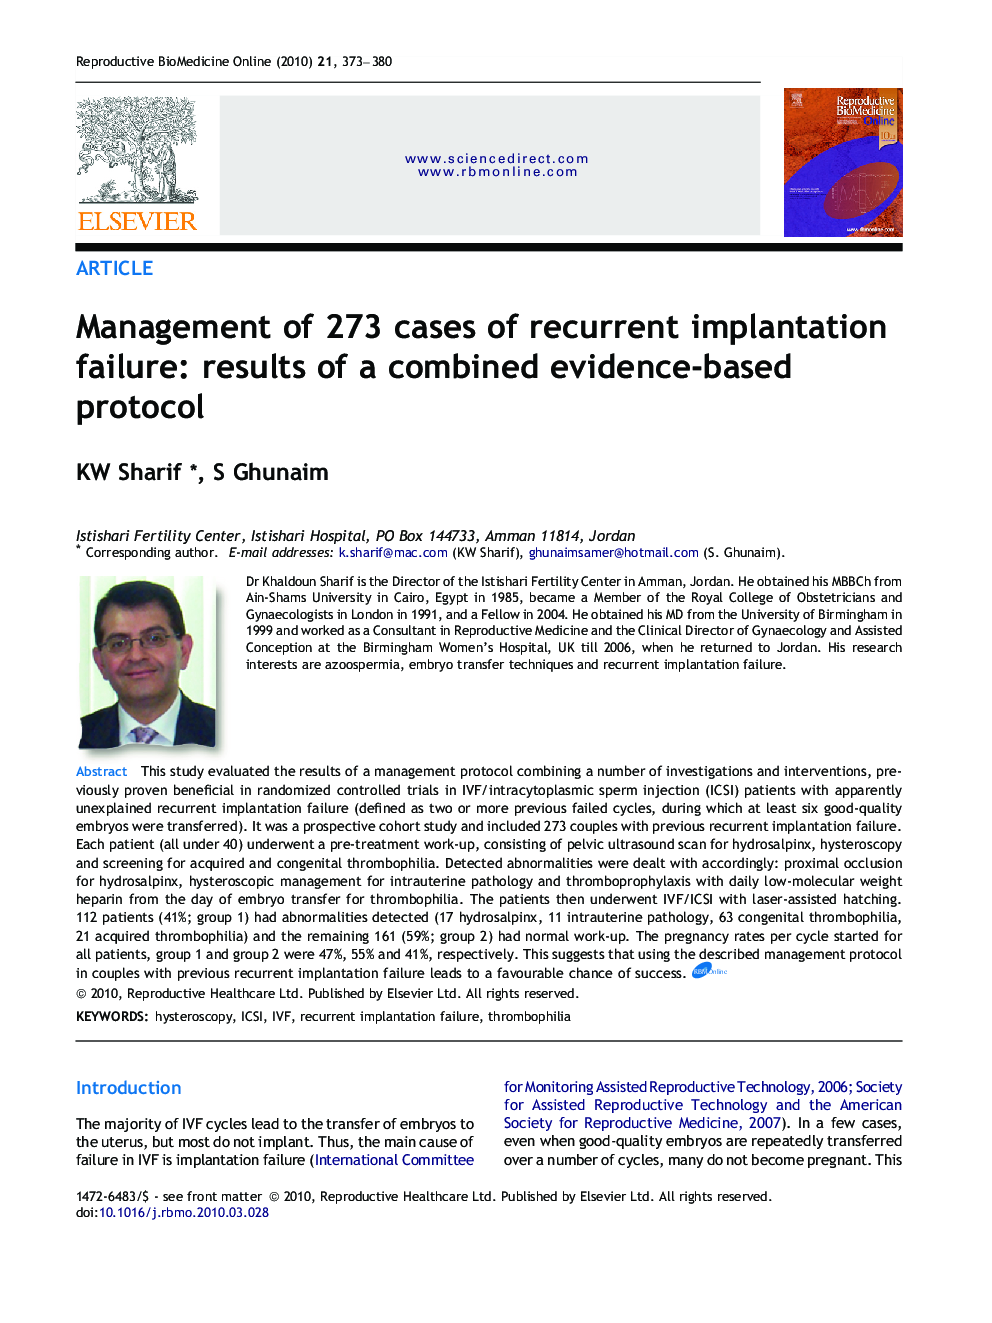 Management of 273 cases of recurrent implantation failure: results of a combined evidence-based protocol 